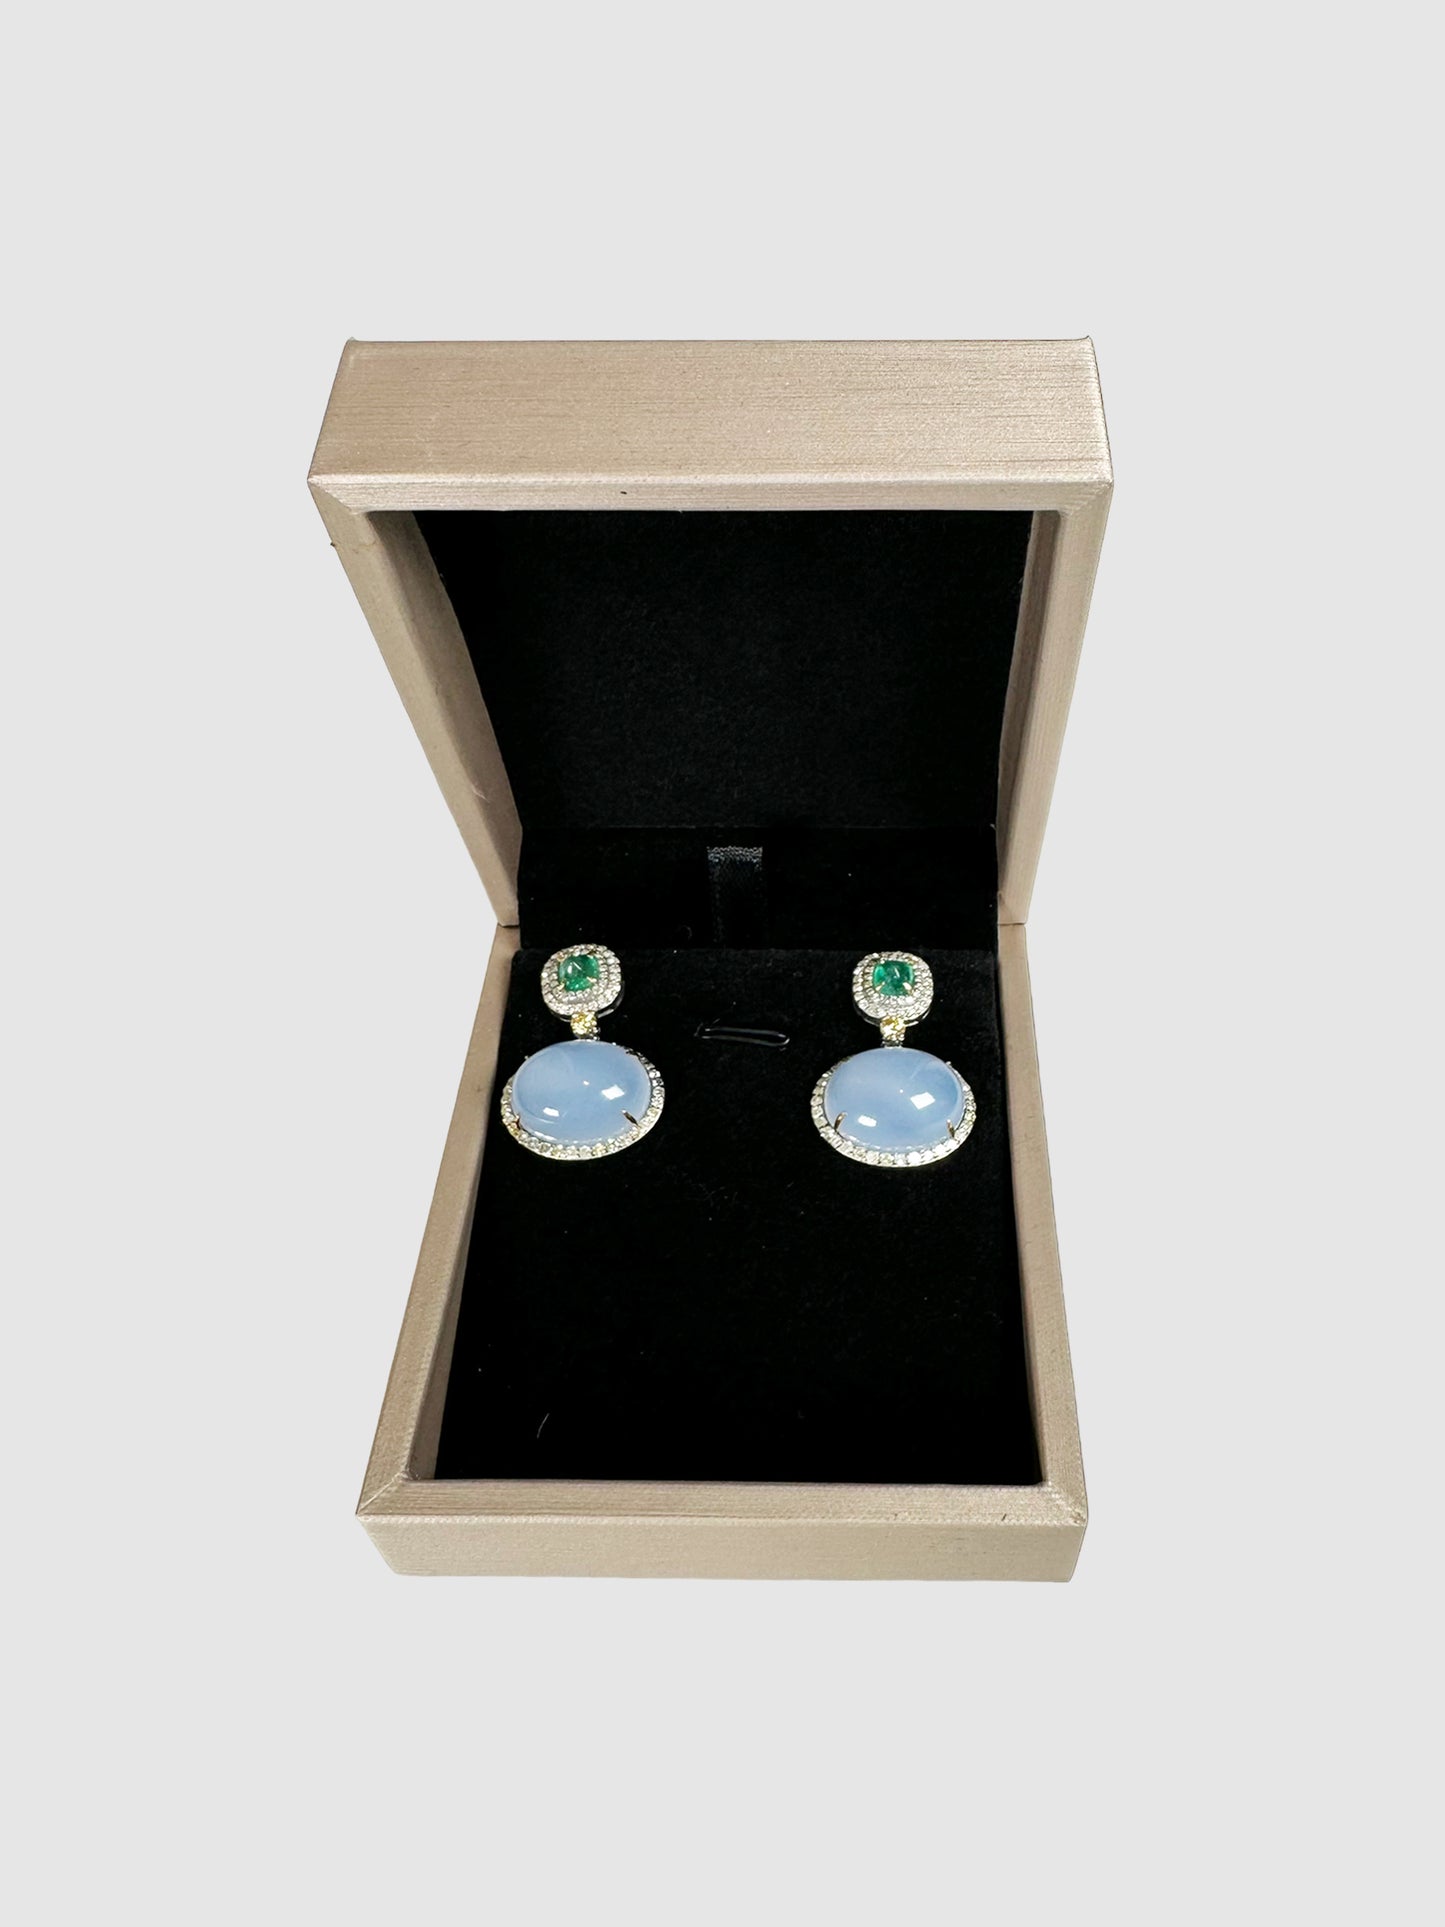 Victorian Emerald and Chalcedony Earrings